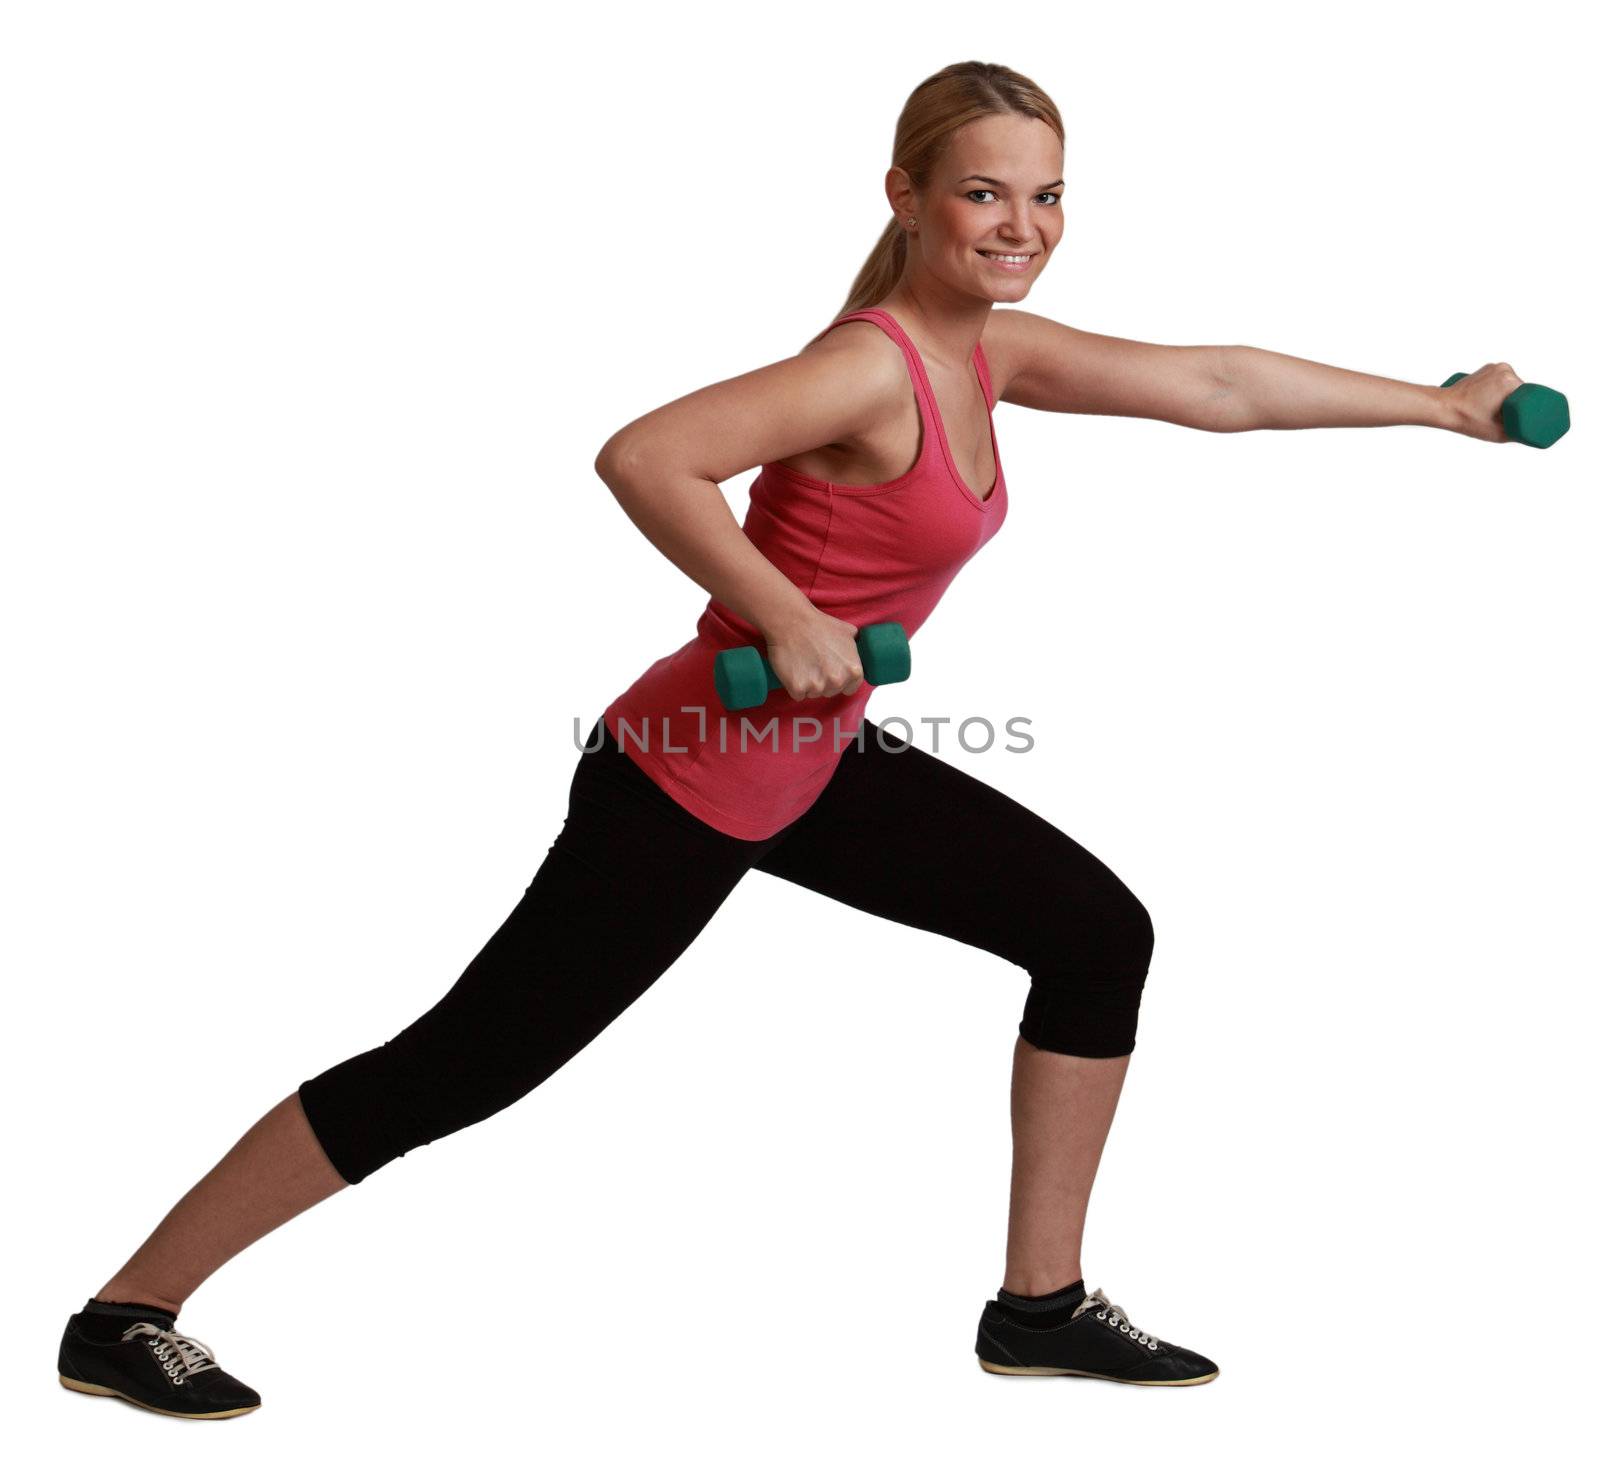 Young blonde woman doing exercise with dumbbells isolated against a white background.